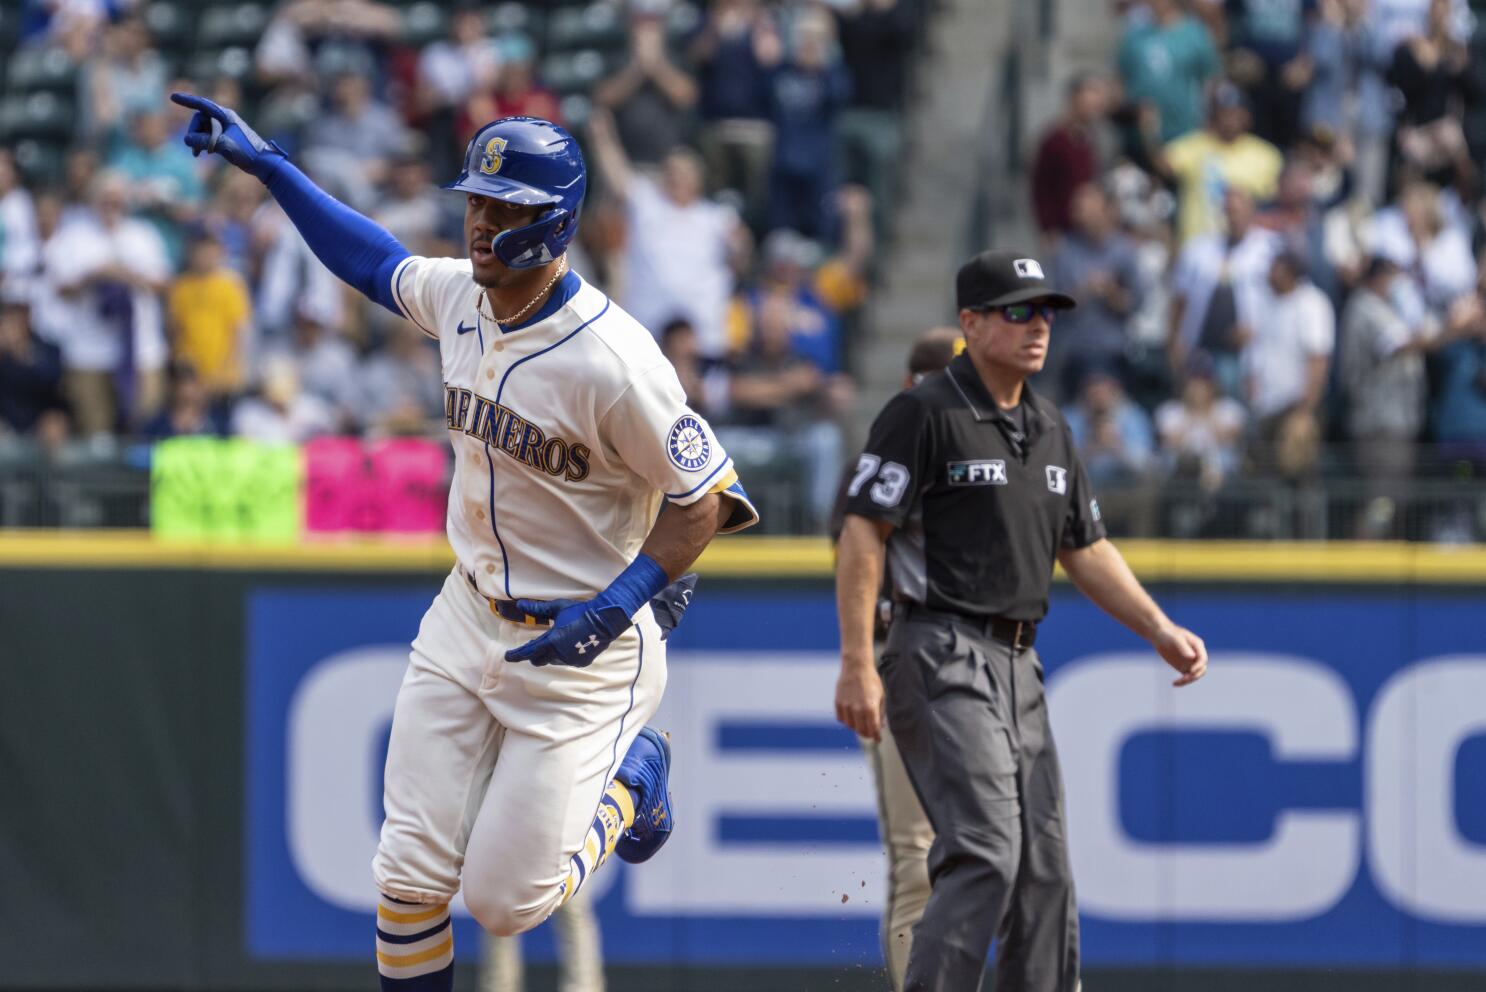 Adames, Santana each hit in two runs to lead Brewers over Rangers 6-1